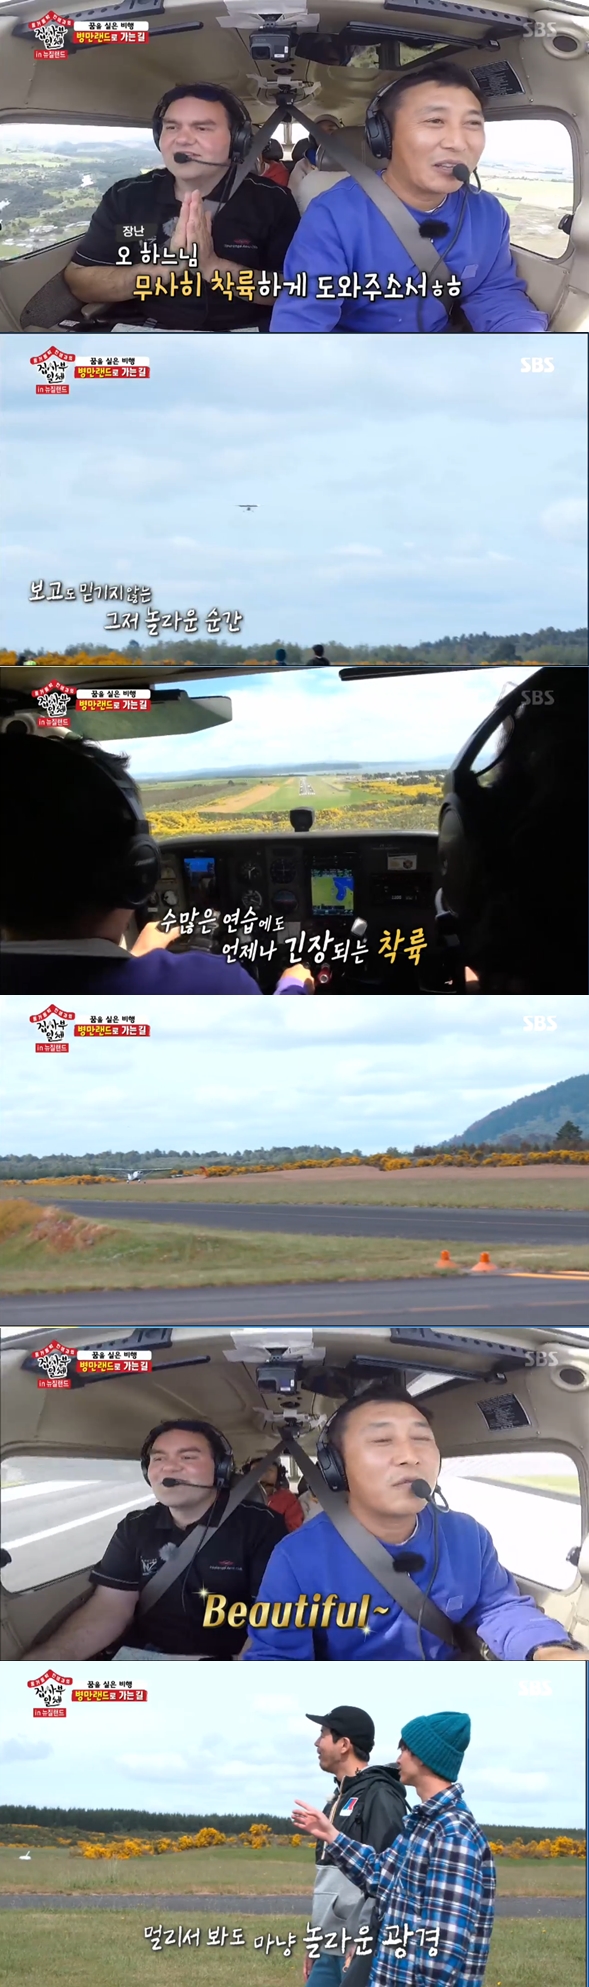 Kim Byung-man showed incredible flight to watchOn the 15th night of SBS entertainment program All The Butlers, Kim Byung-man, who appeared as the second master for the first time on the air, showed adventure in New Zealand.Kim Byung-man, who has already successfully completed the flight by Lee Seung-gi and Yang Se-hyeong at Motiti, showed off a wonderful flight in front of Lee Sang-yoon and the upbringing.Lee Seung-gi and Yang Se-hyeong were on board this flight together.Lee Sang-yoon was admiring Kim Byung-man, who flew coolly and Apollo Lunar Module, saying, I can not believe it.The agent who gives detailed instructions next to Kim Byung-man also praised Kim Byung-man as beautiful when he succeeded in the Apollo Lunar Module.Kim Byung-man did not forget the comedians duty after gagging after doing the Apollo Lunar Module in a cool way.